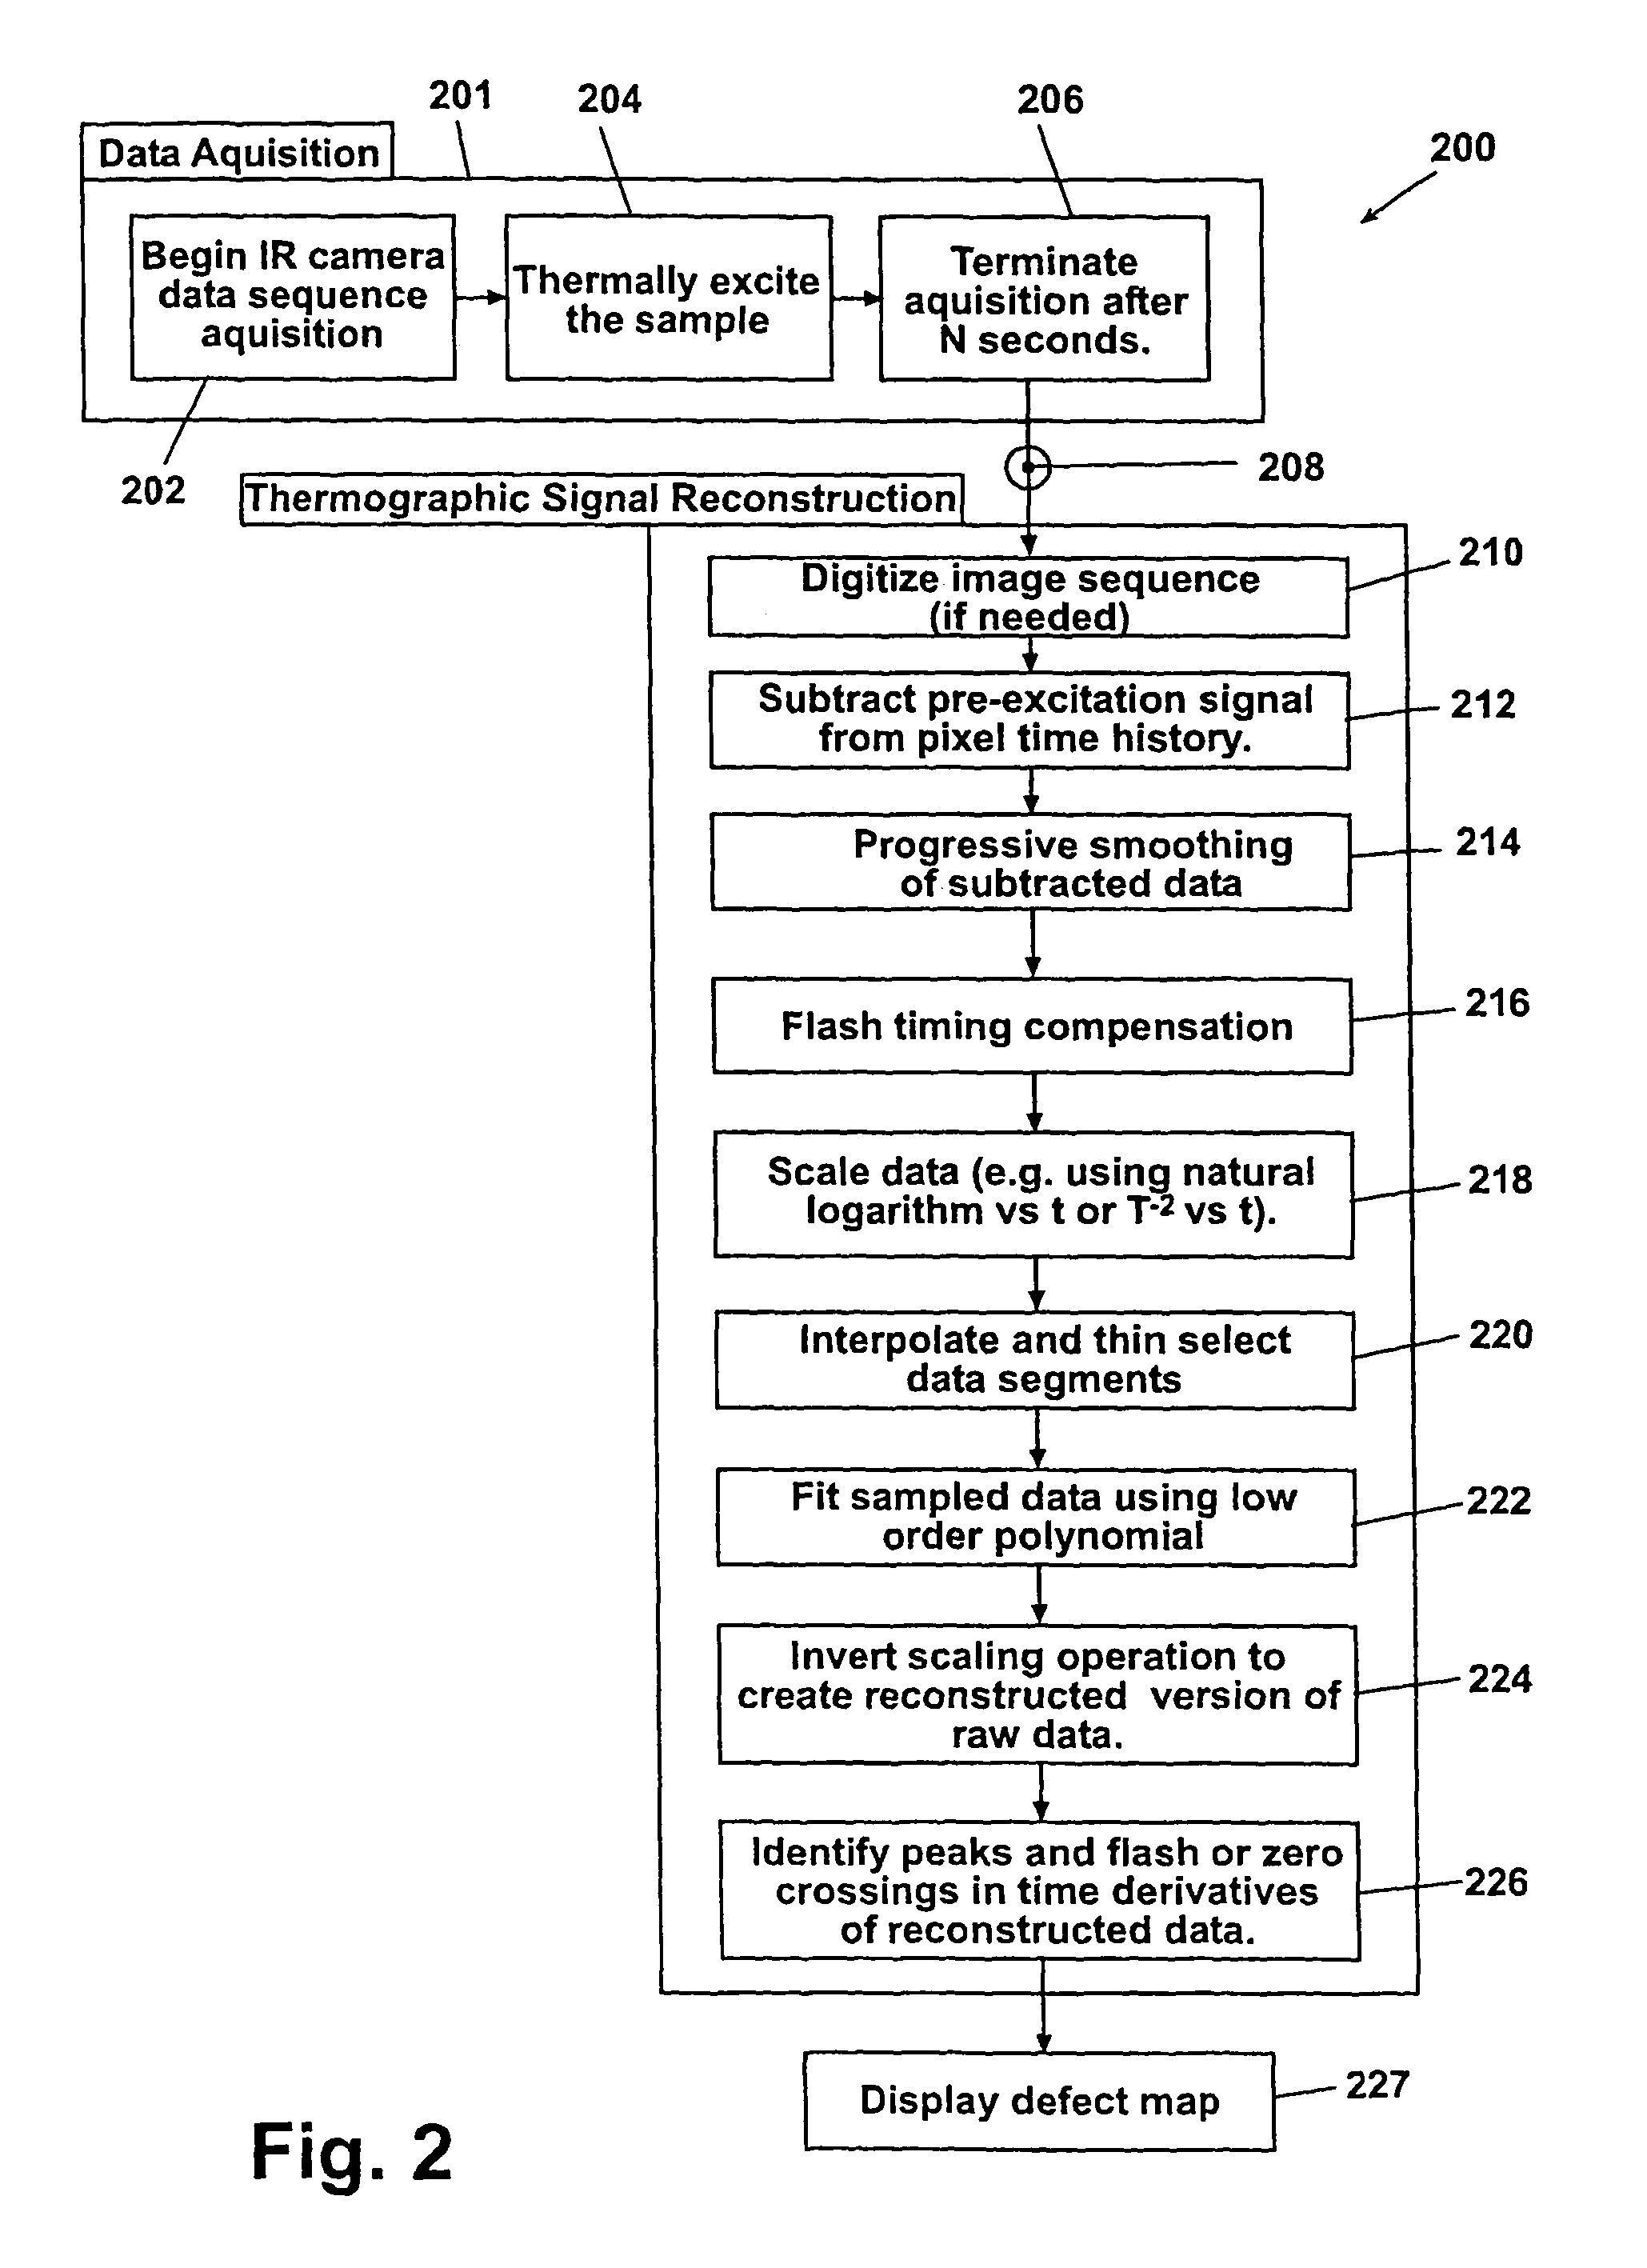 System for generating thermographic images using thermographic signal reconstruction